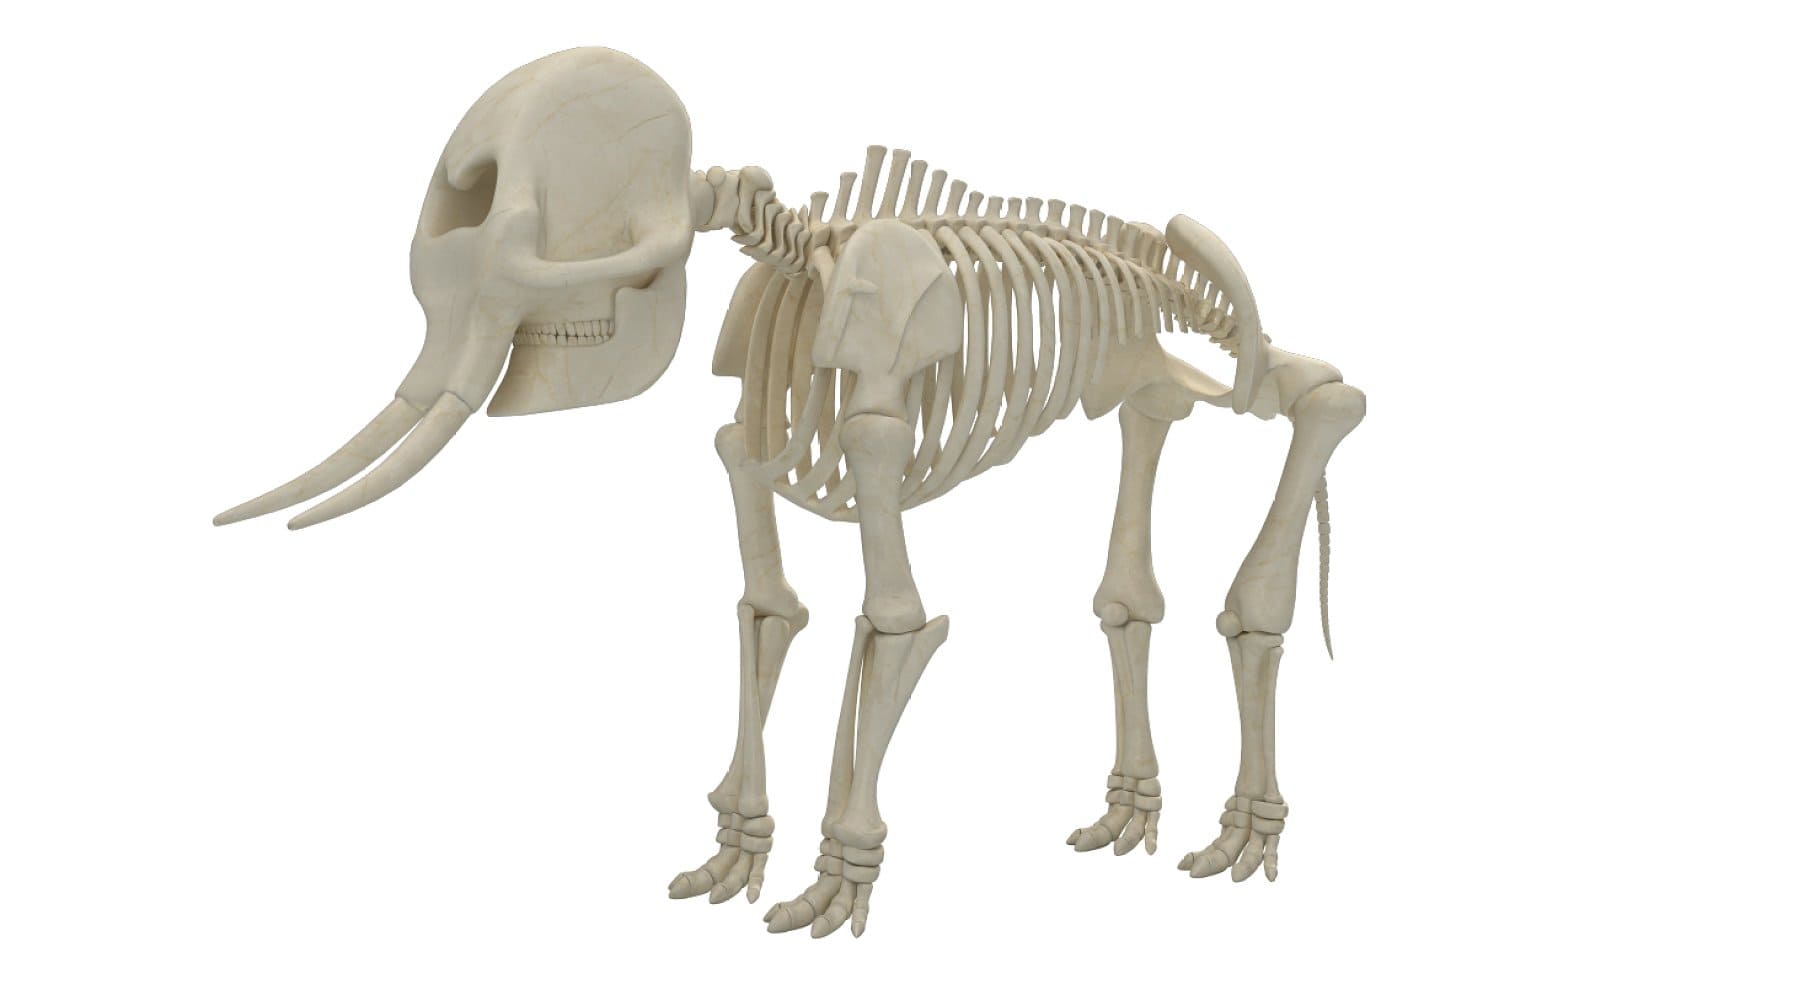 An image of an elephant skeleton with small fingers.